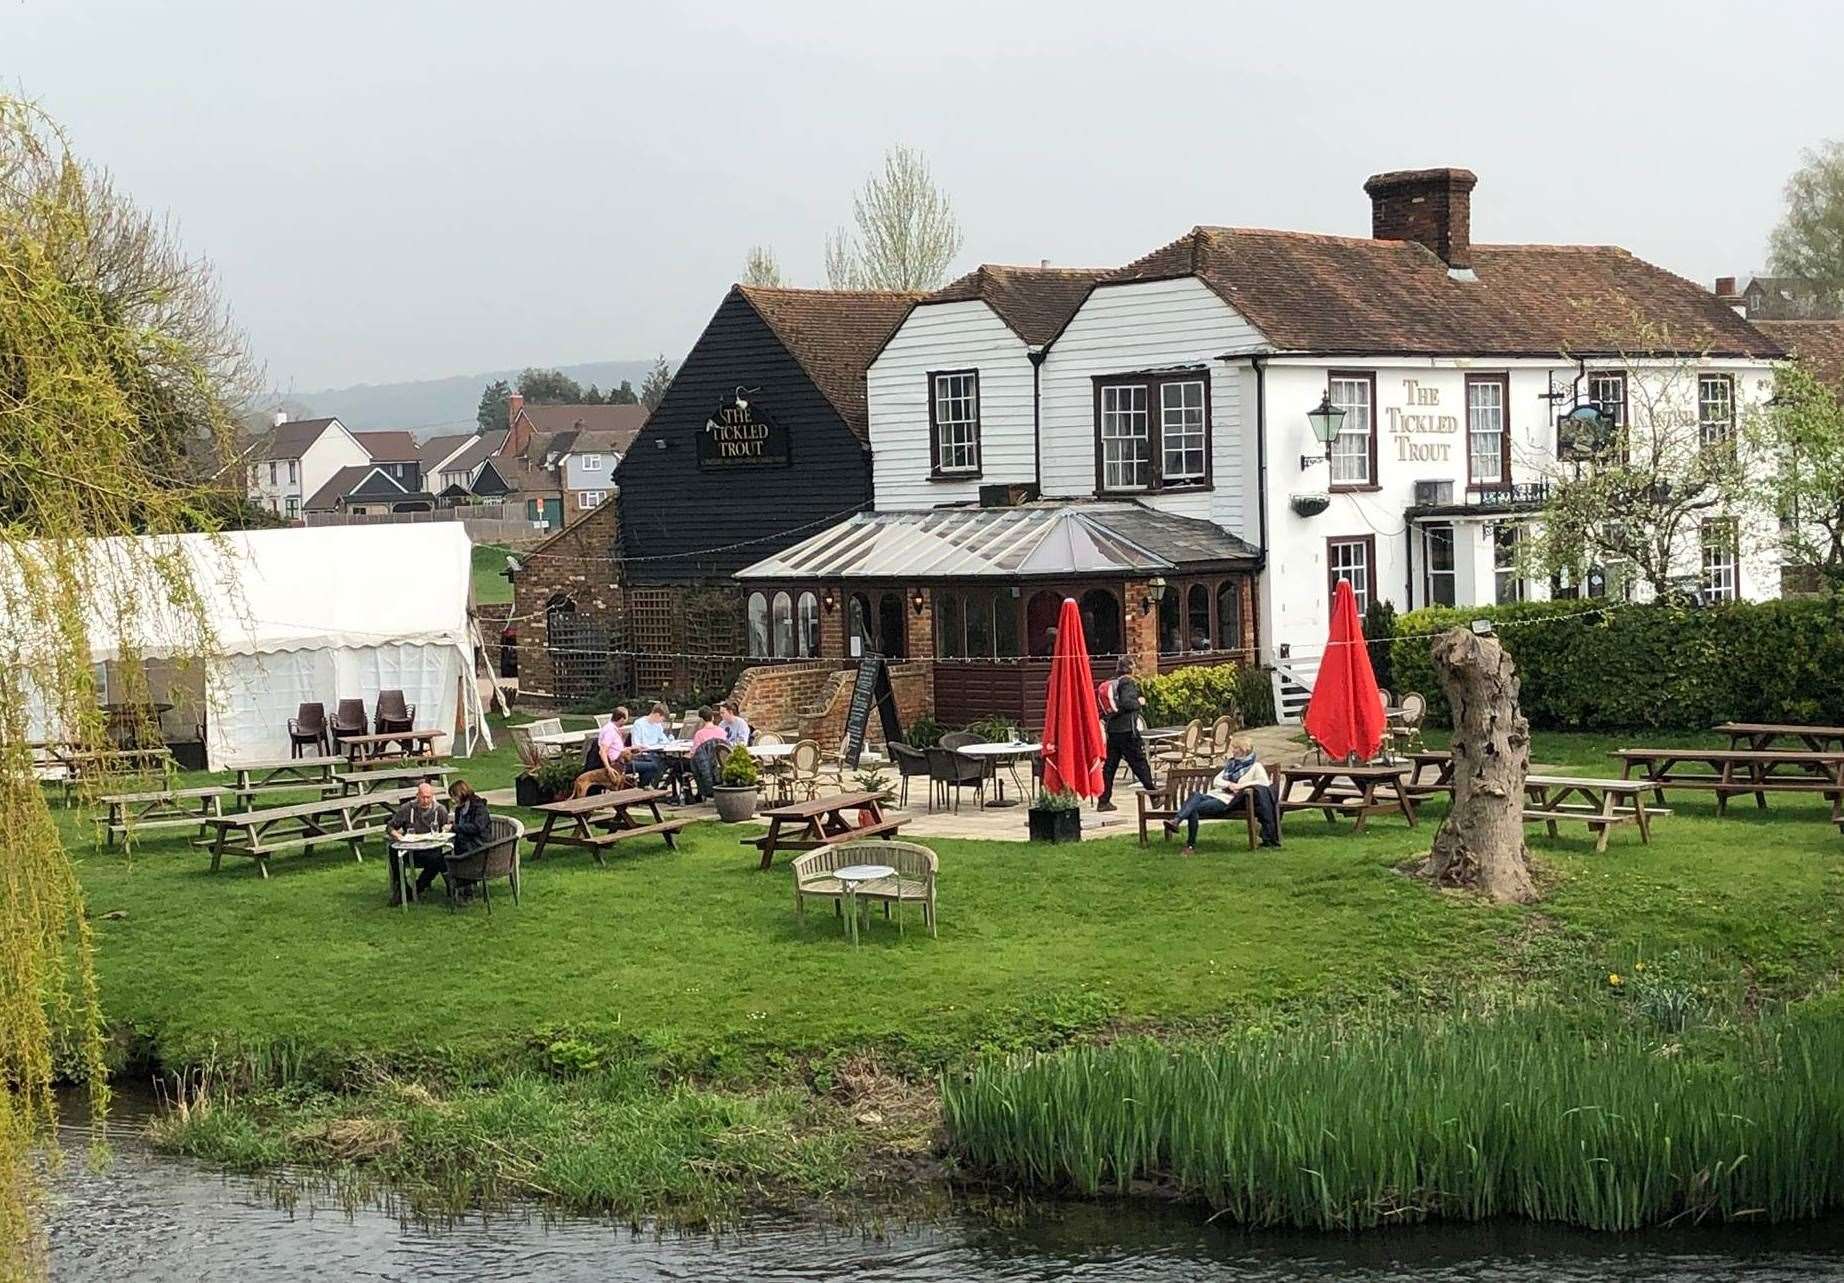 The Tickled Trout in Wye